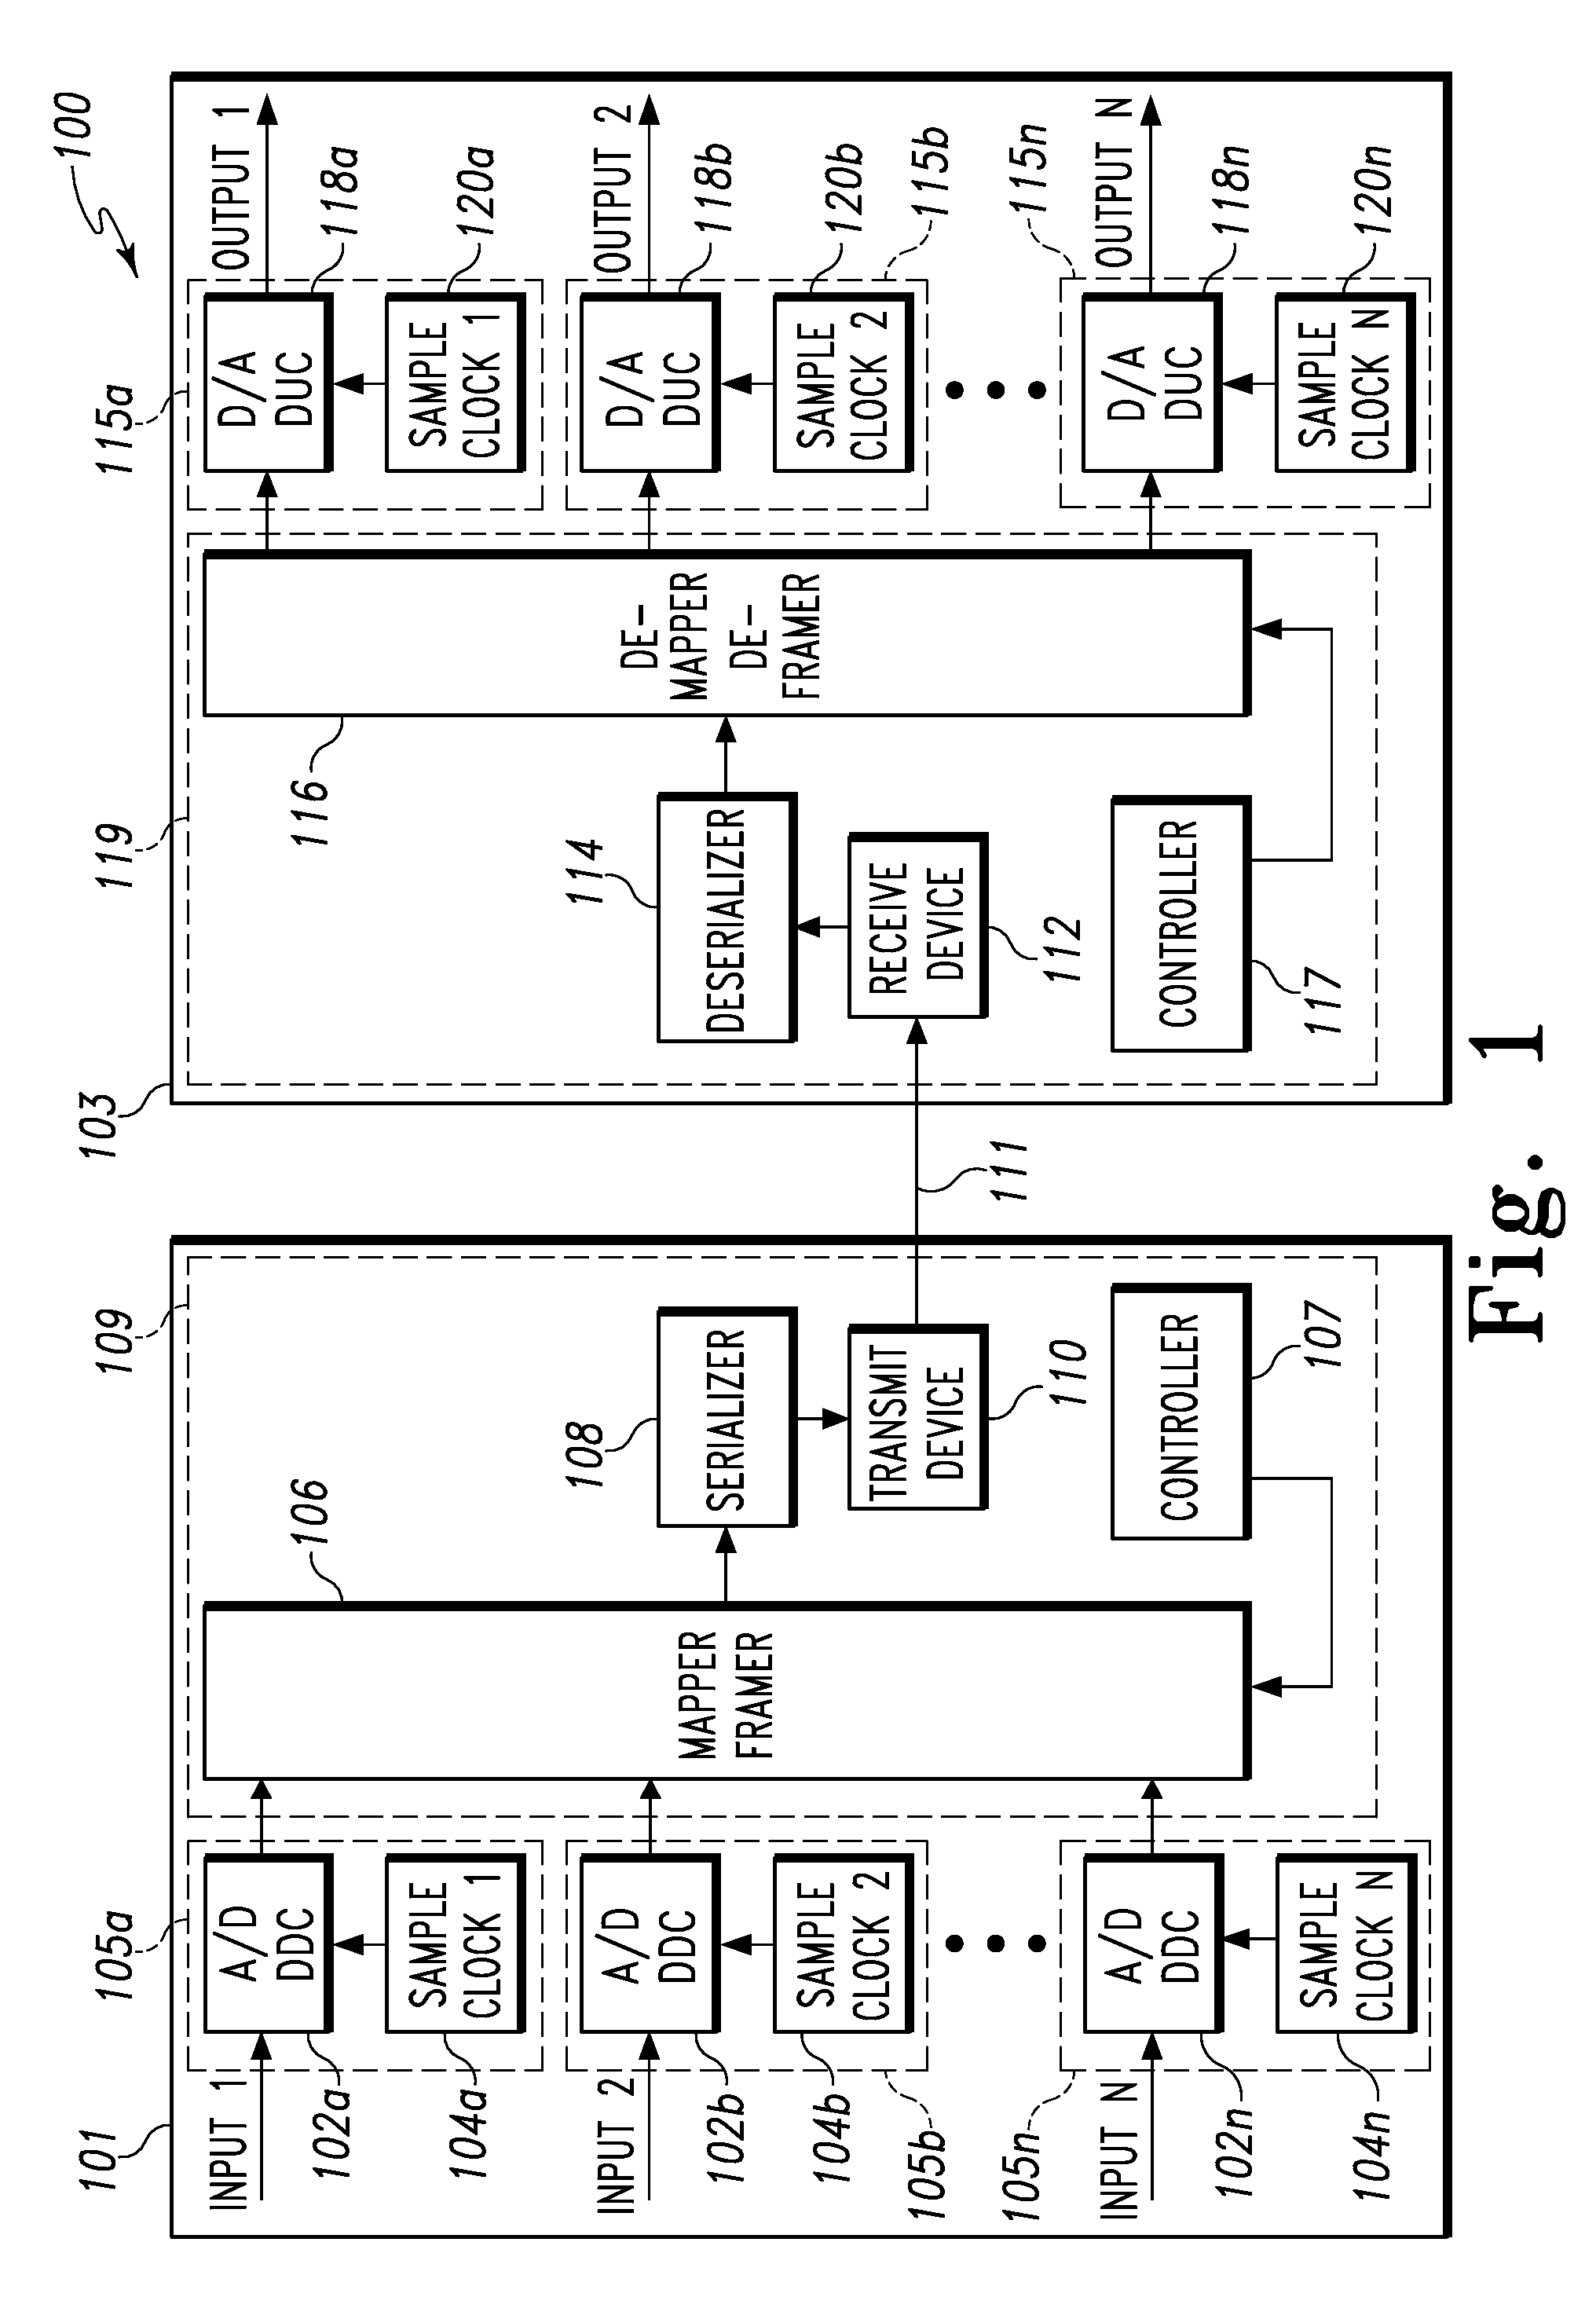 Method and system for enhancing the performance of wideband digital RF transport systems